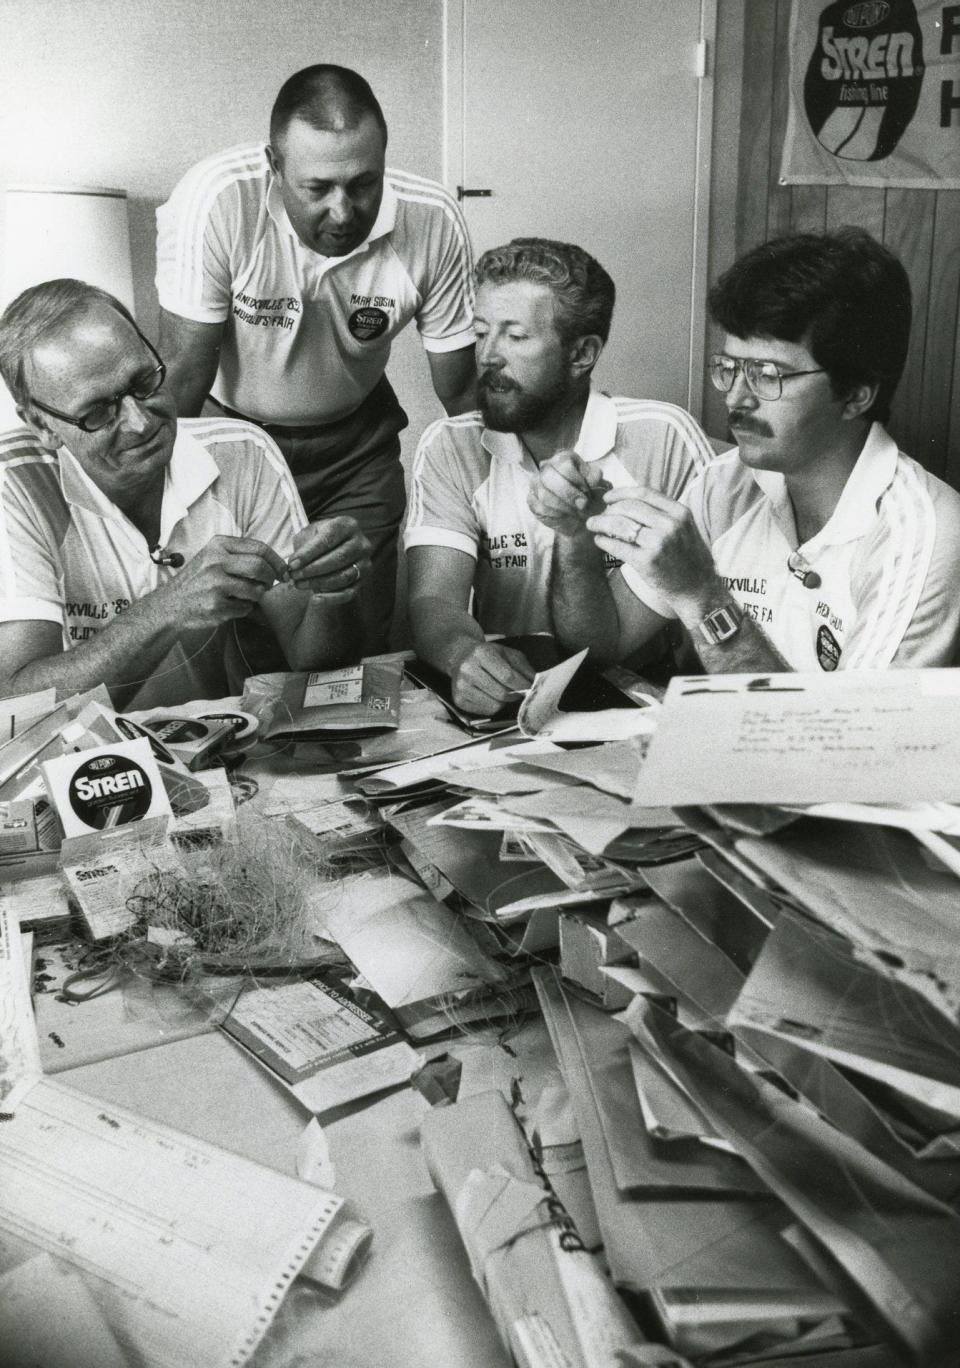 Vic Dunaway, Mark Sosin, Jerry Gibbs and Ken Schultz, from left, inspect some of the 500 entries in the World's Fair Stren Great Knot Search during the 1982 World's Fair in Knoxville.